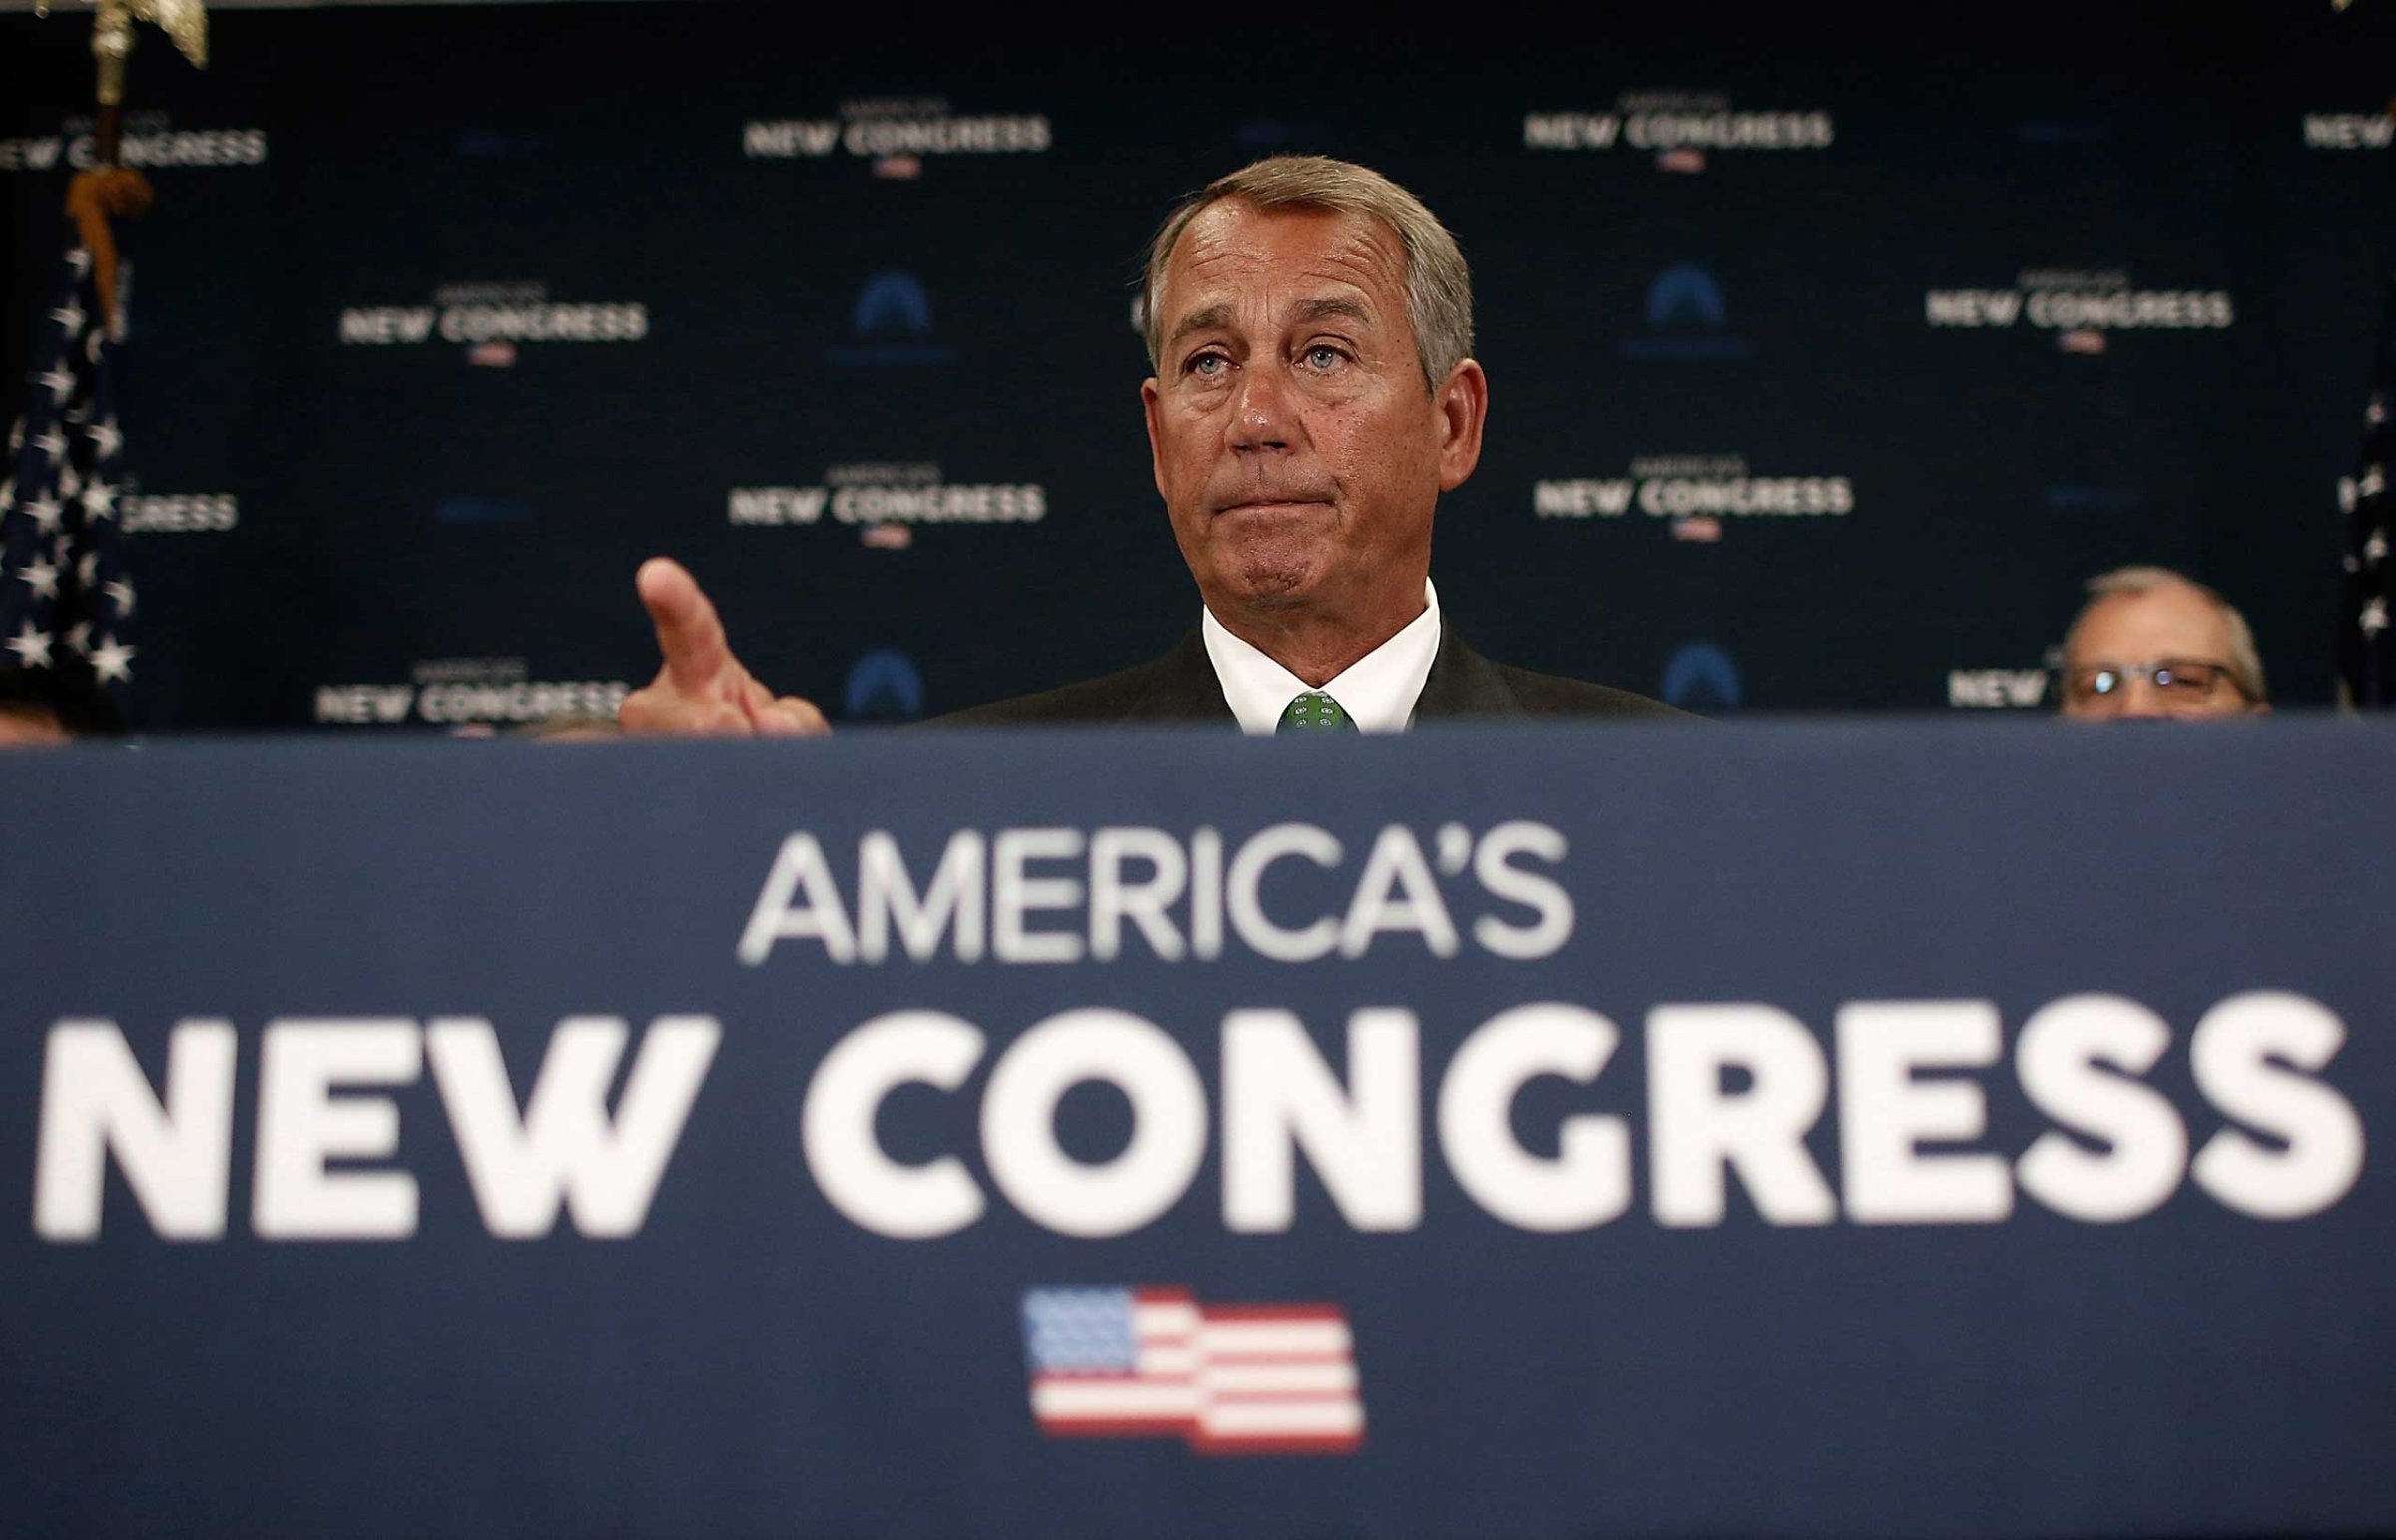 Speaker of the House John Boehner (R-OH) answers questions during a press conference at the U.S. Capitol in Washington on Jan. 7, 2015.